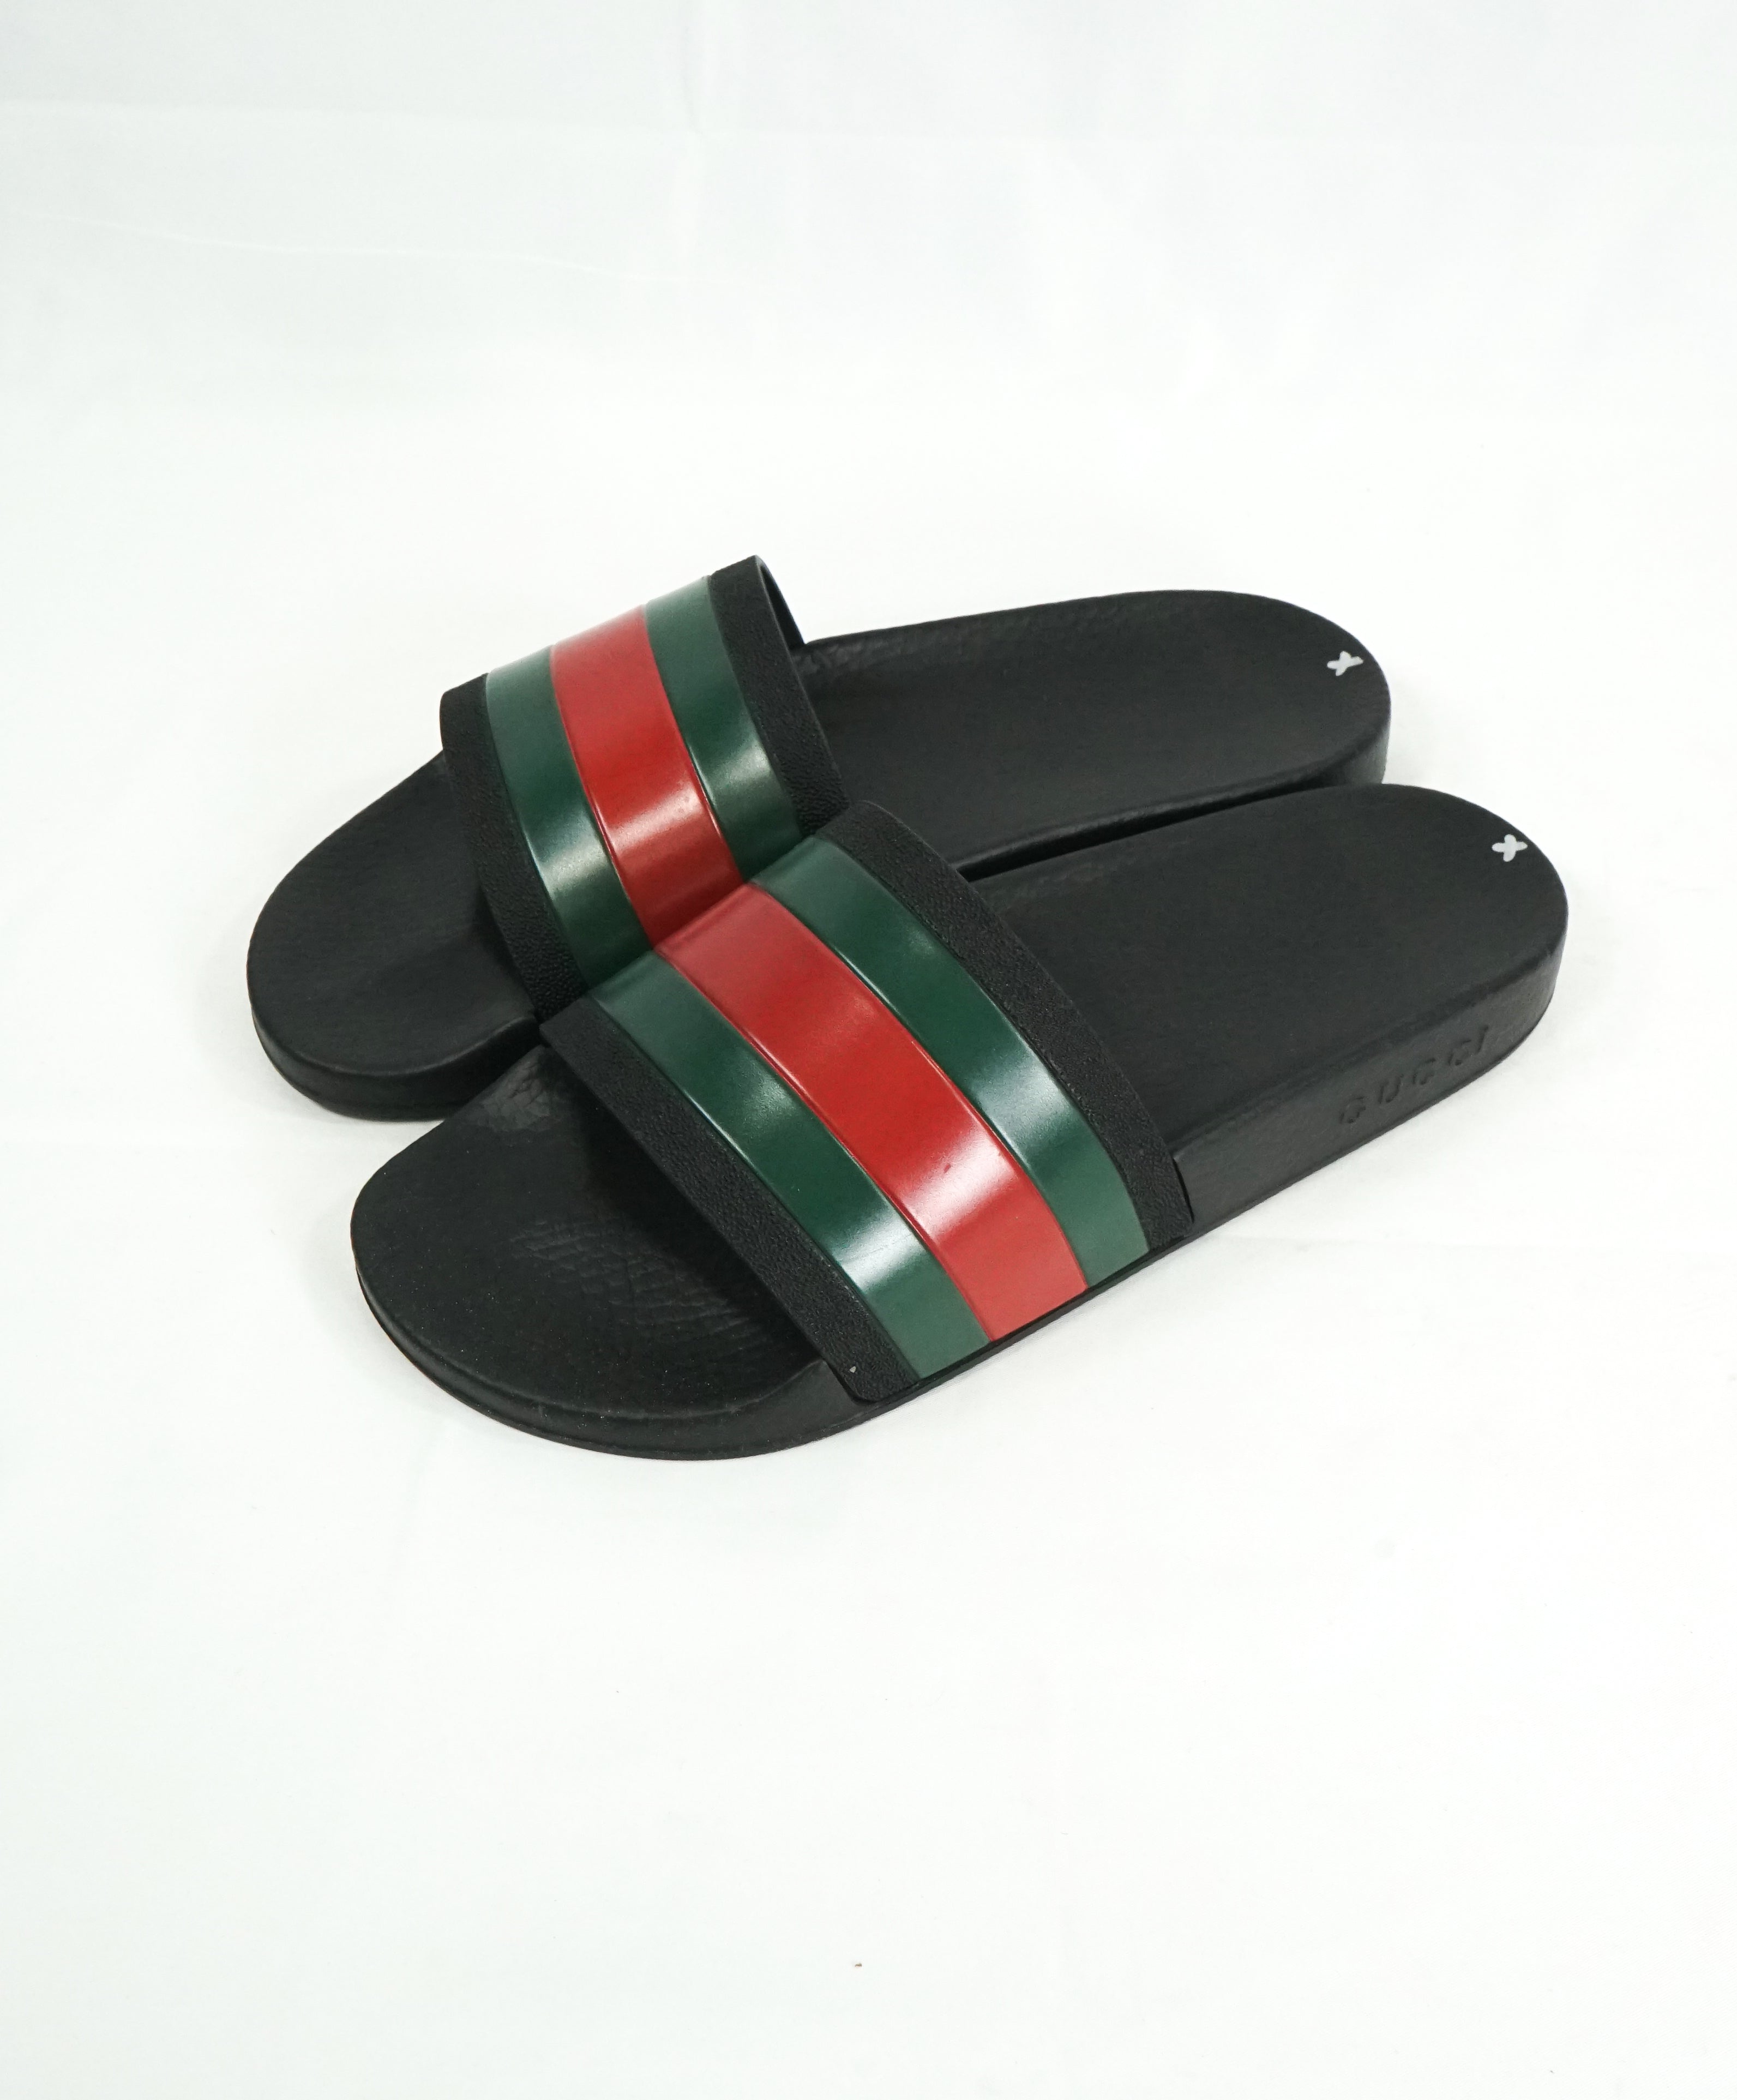 green and red gucci flip flops,OFF 75 